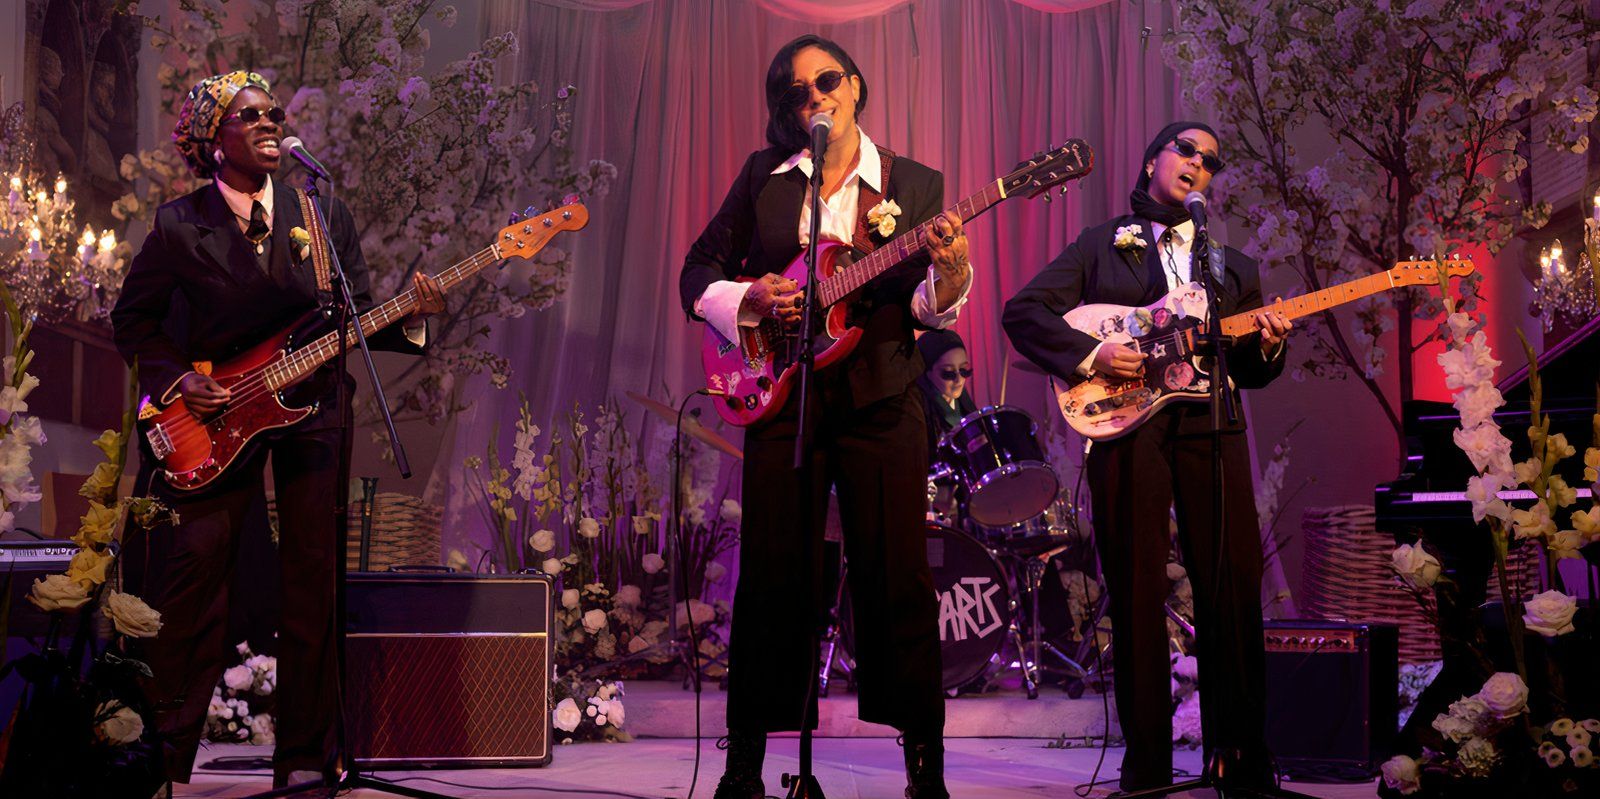 Lady Parts performs at a wedding in We Are Lady Parts season 2 still